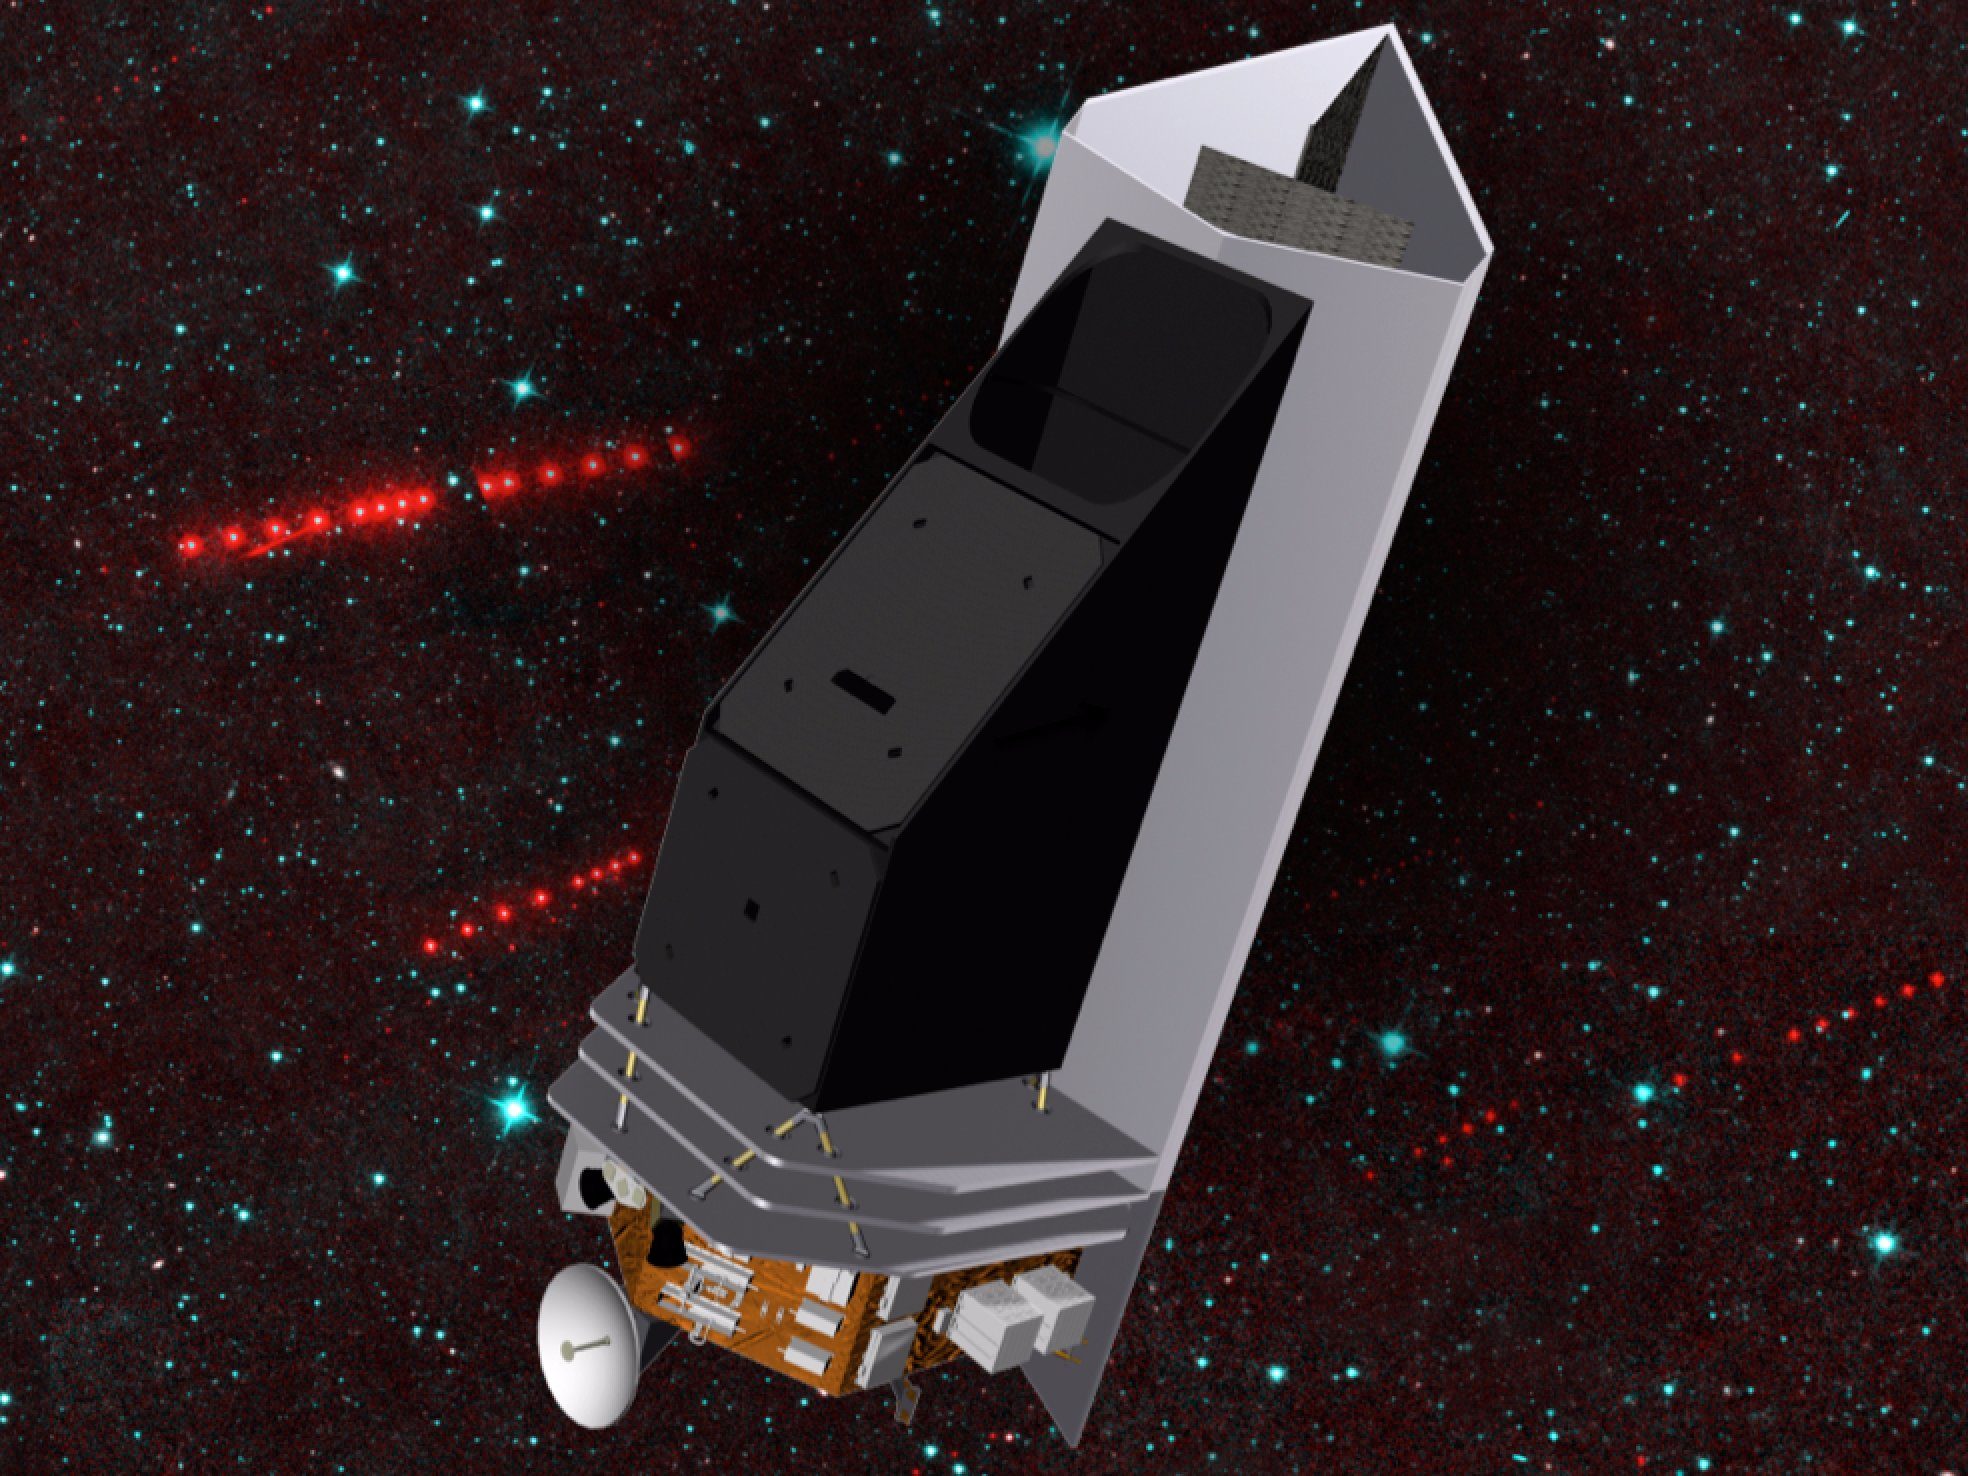 NEOCam asteroid-hunting telescope